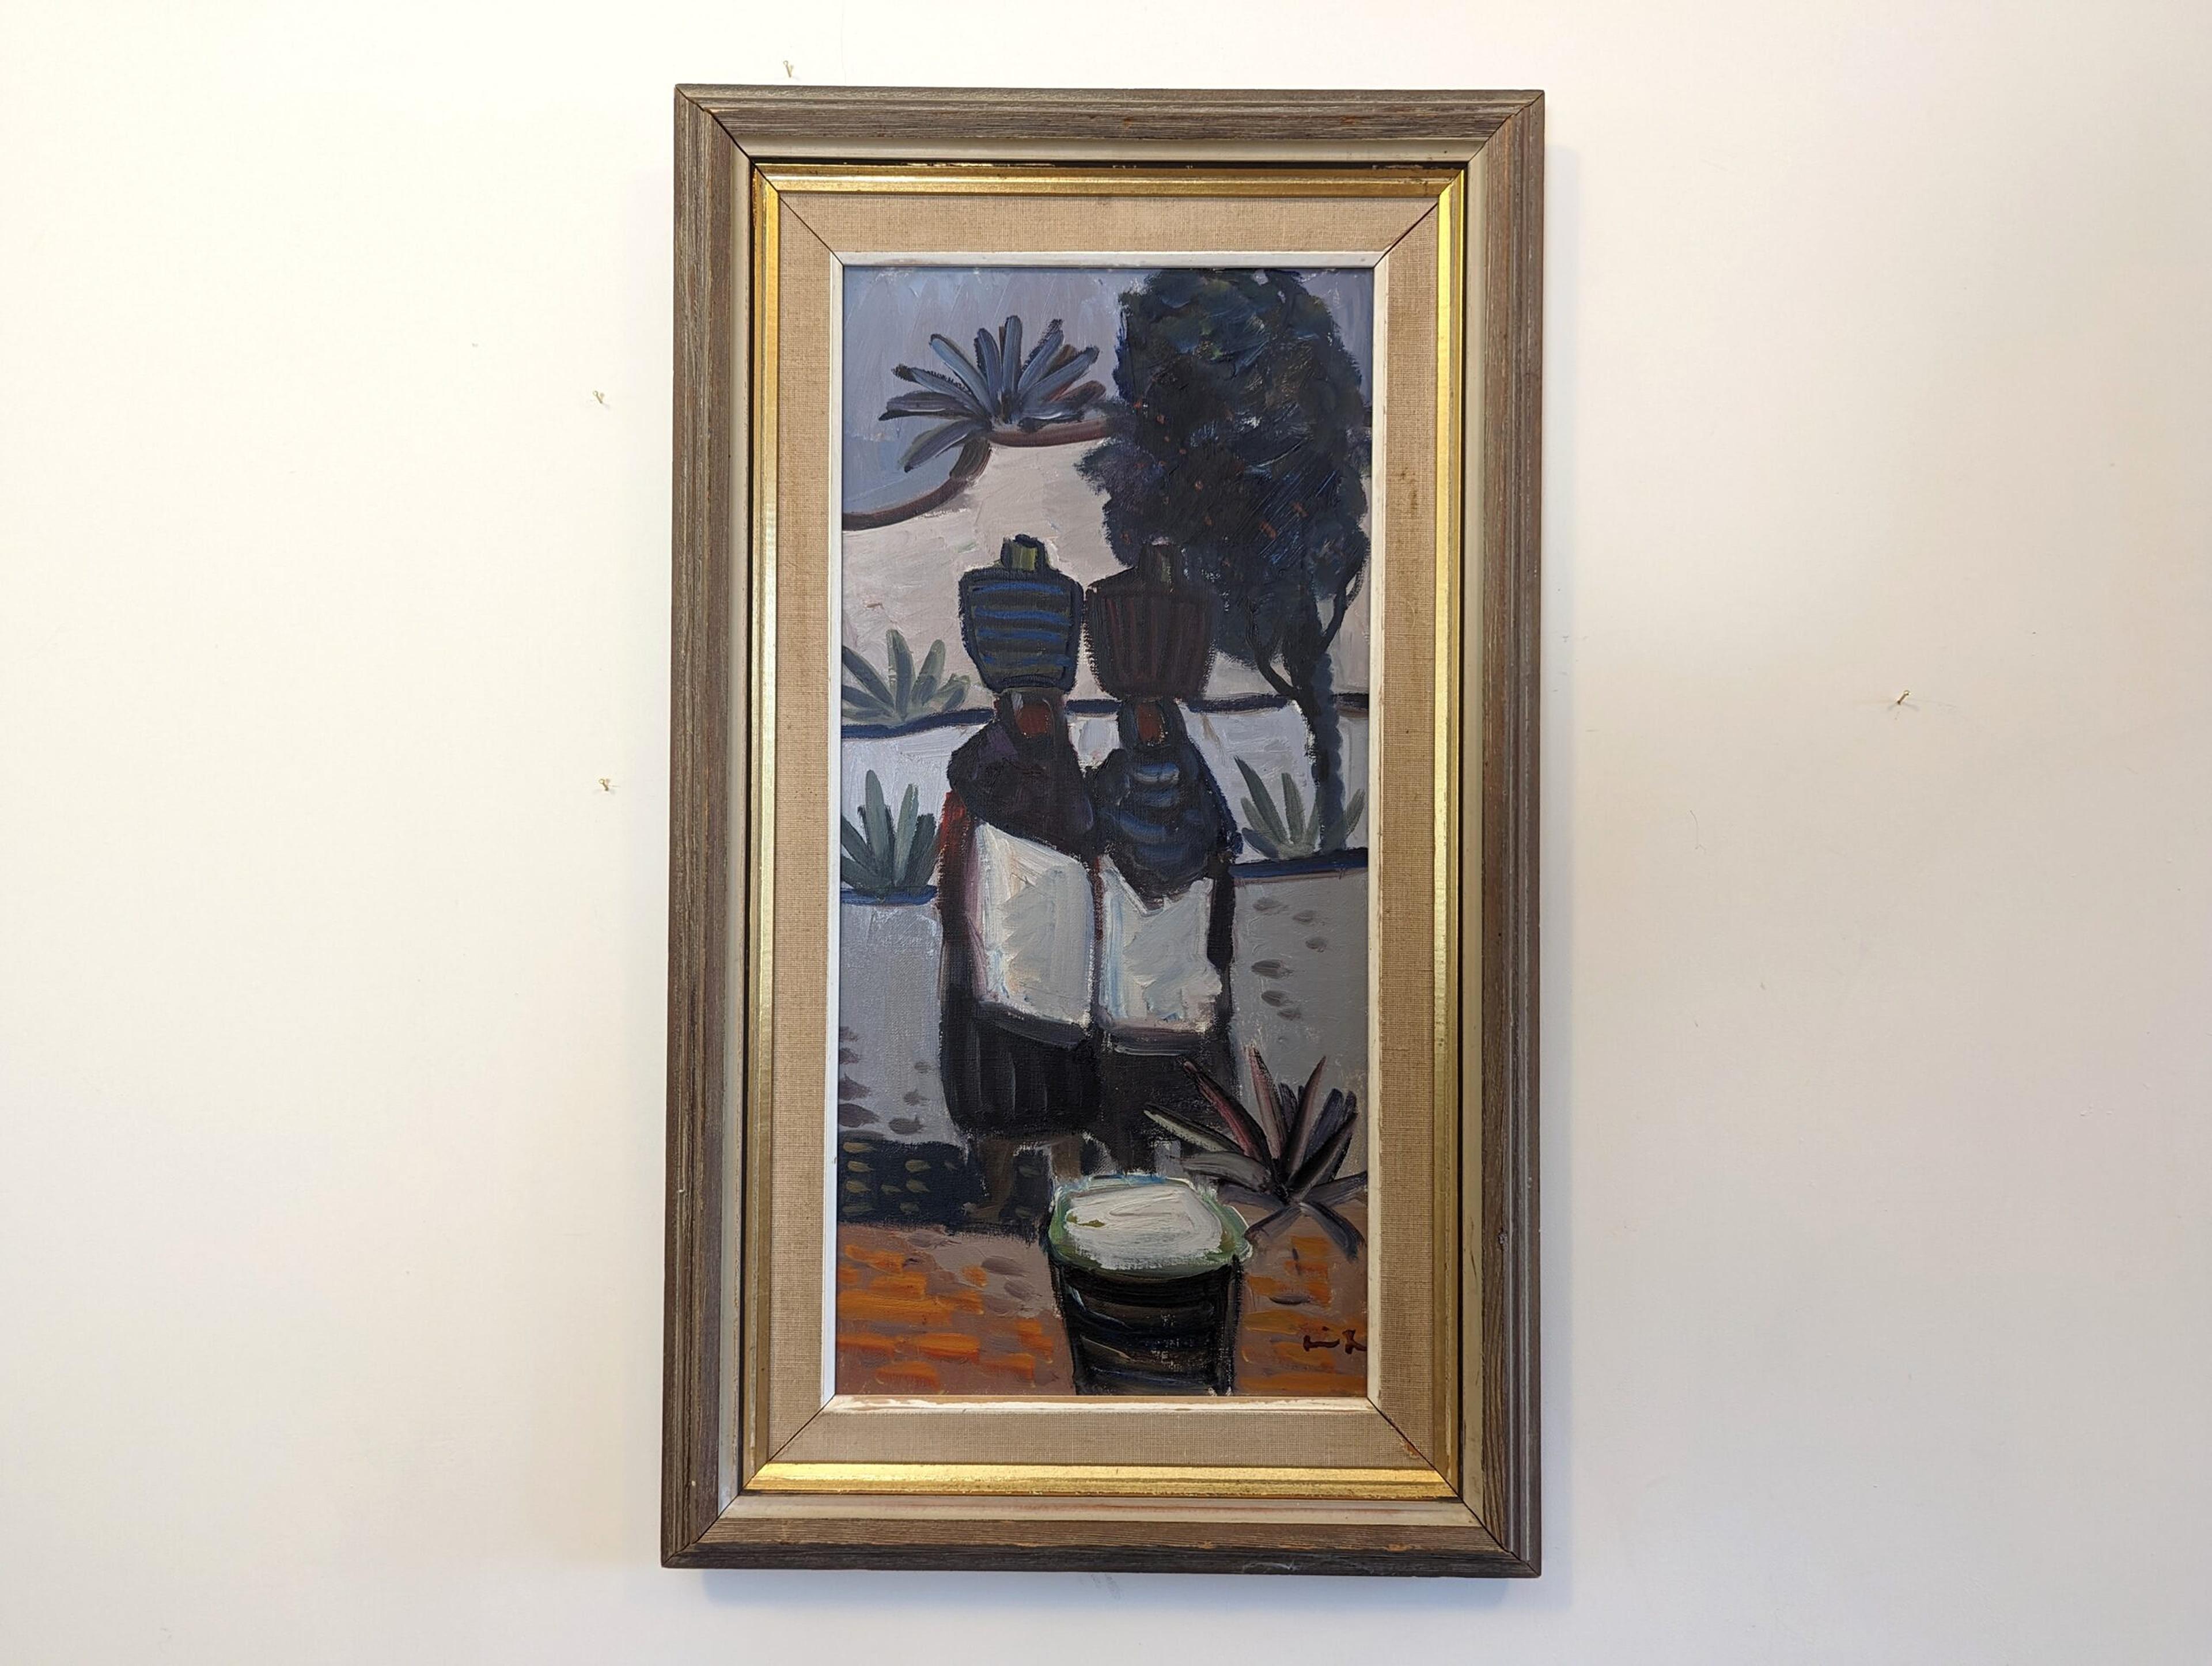 BASKET CARRIERS
Oil on Canvas
Size: 74 x 43.5 cm (including frame)

A wonderful mid century modernist composition, painted in oil onto canvas.

Two figures with baskets on their heads are depicted through the use of broad and distinct brushstrokes.